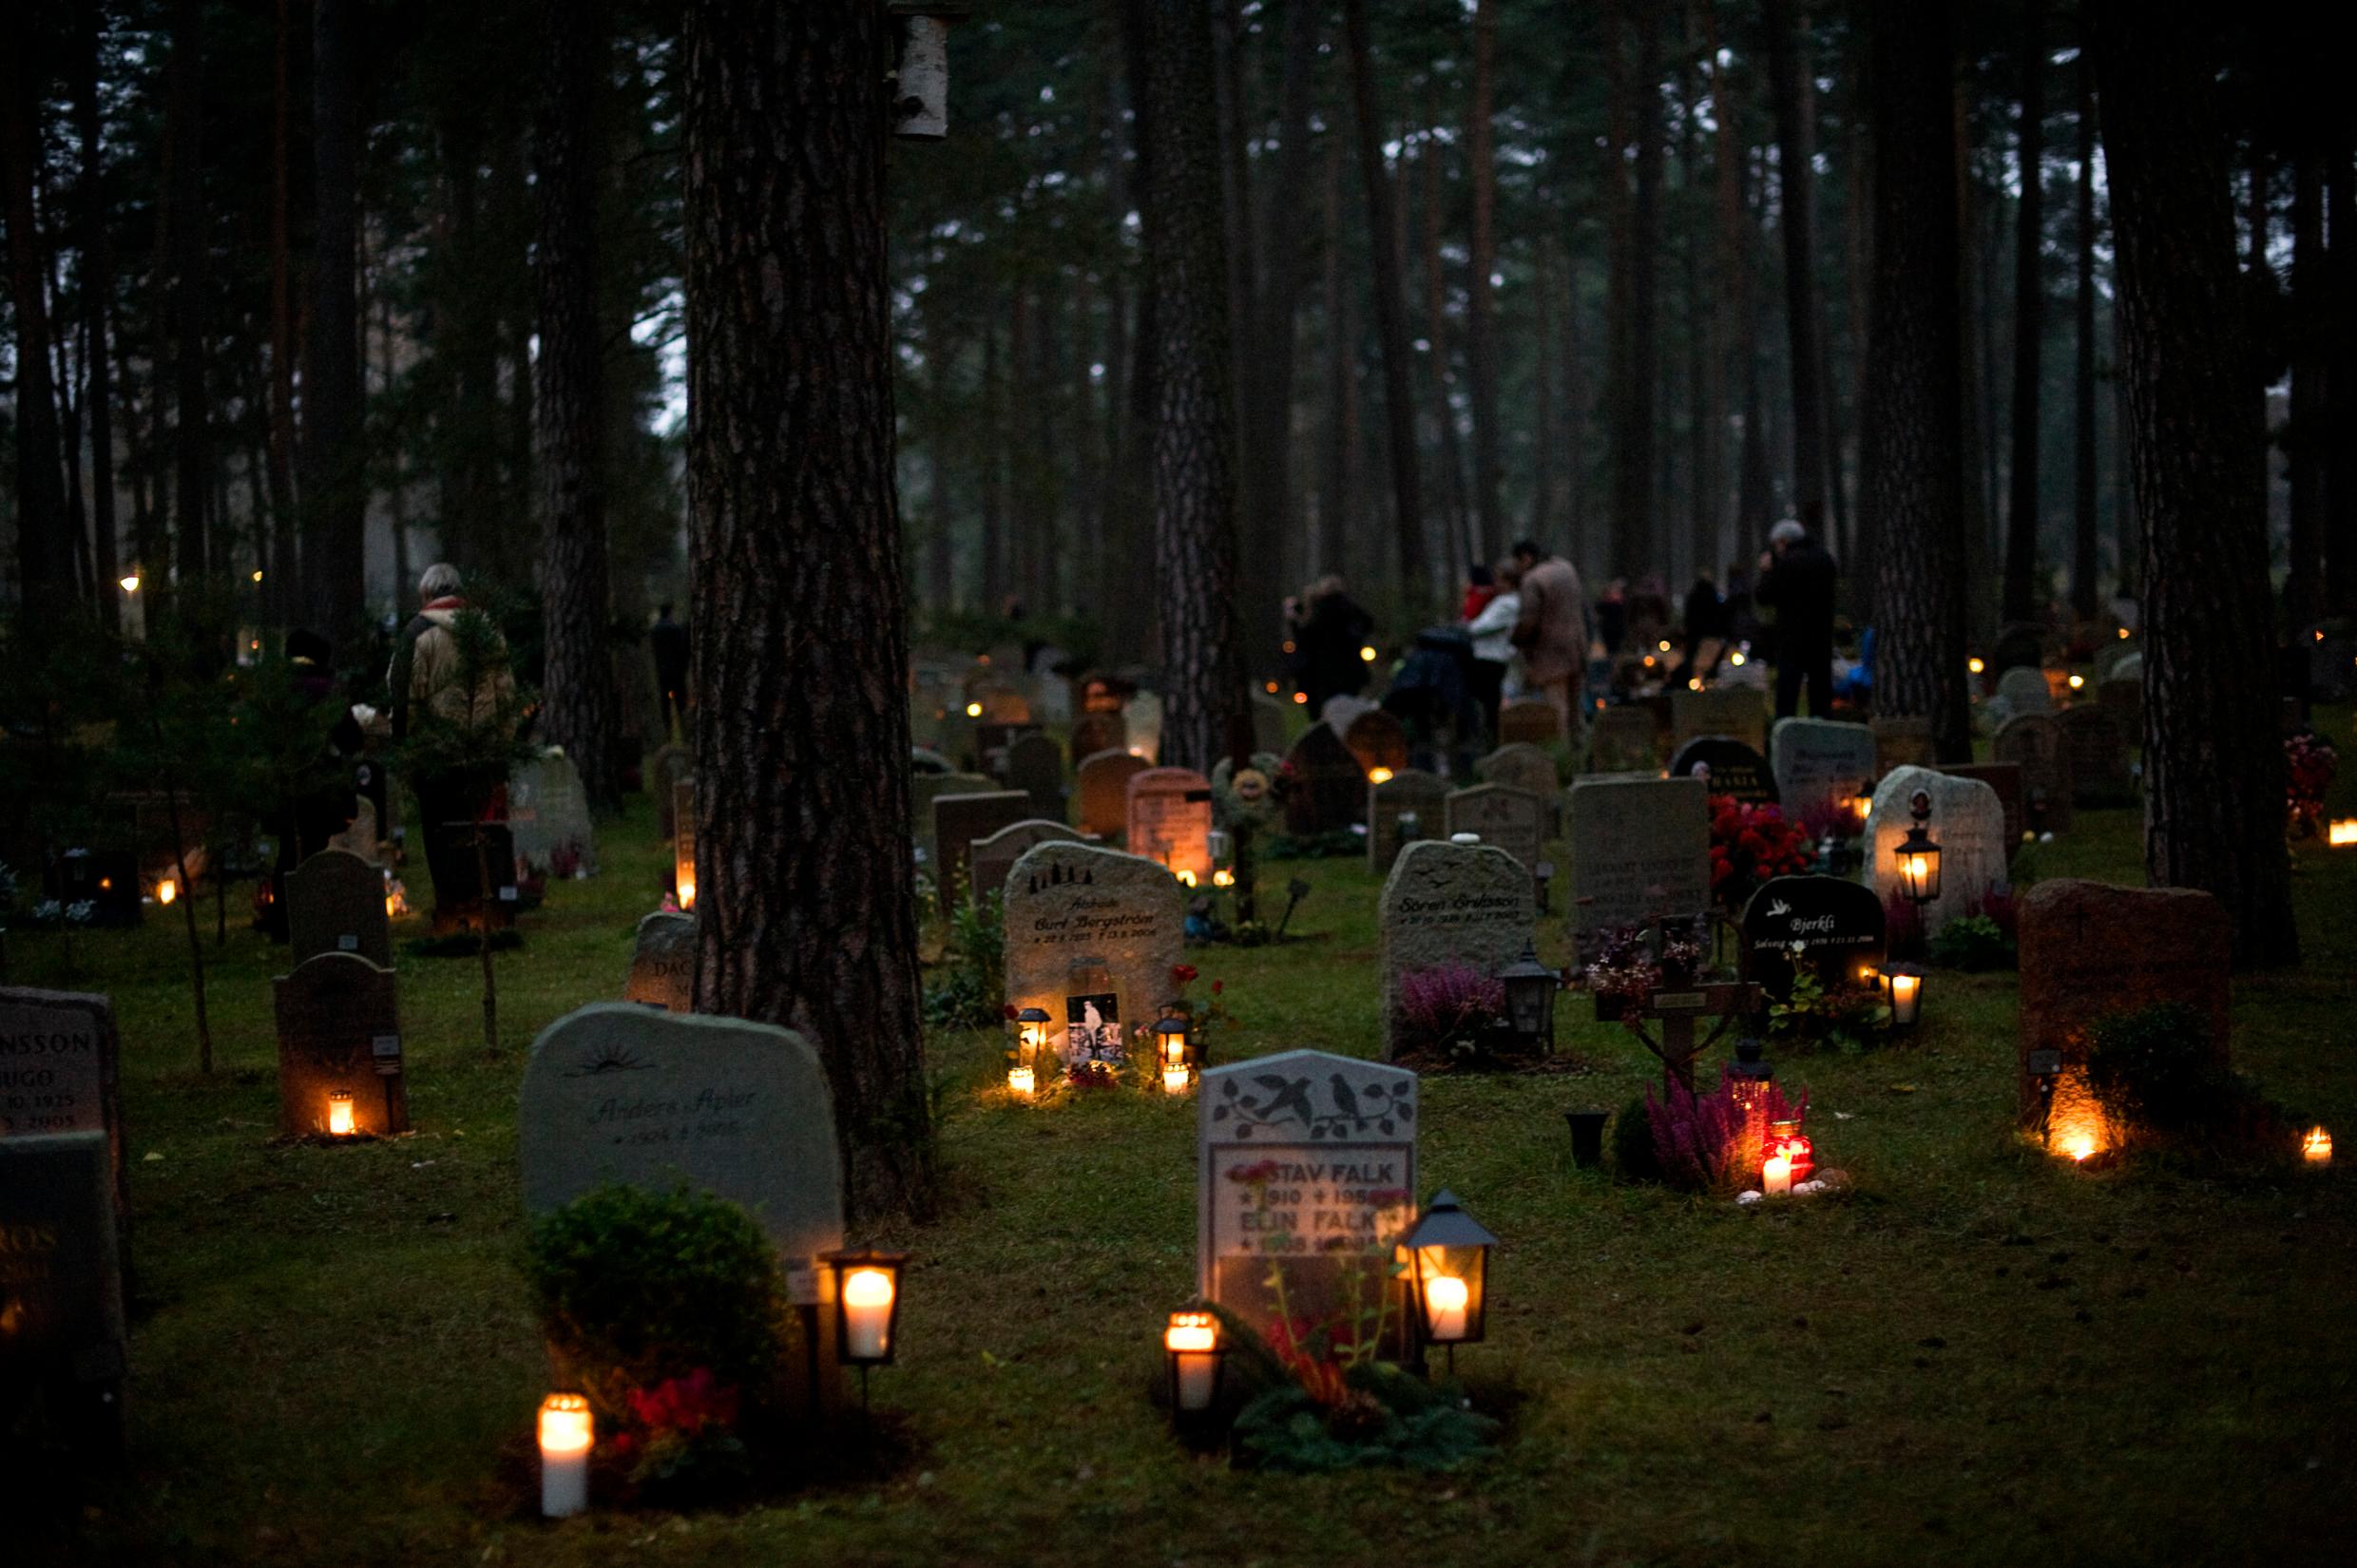 Stockholm's Woodland Cemetery lit up by candles on the graves.